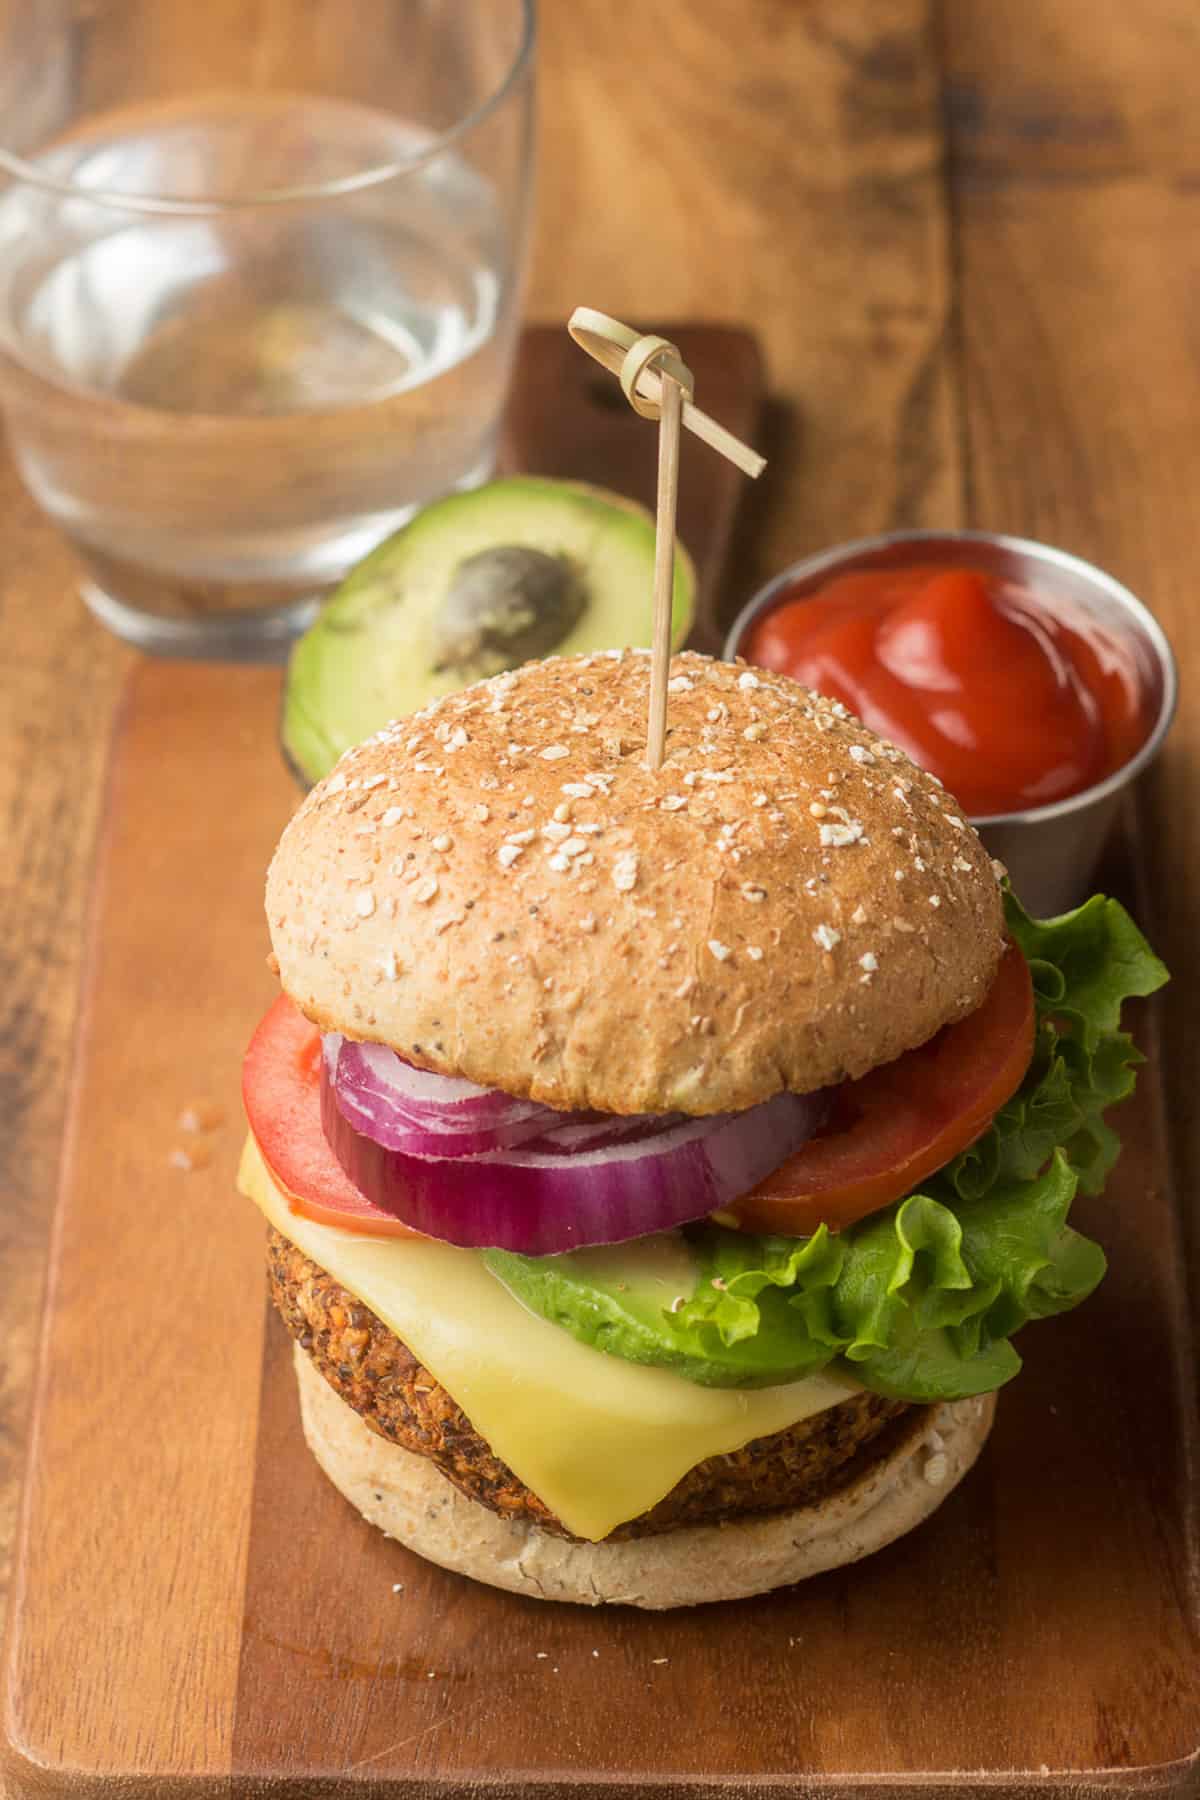 Quinoa burger with avocado, glass of water, and dish of ketchup in the background.